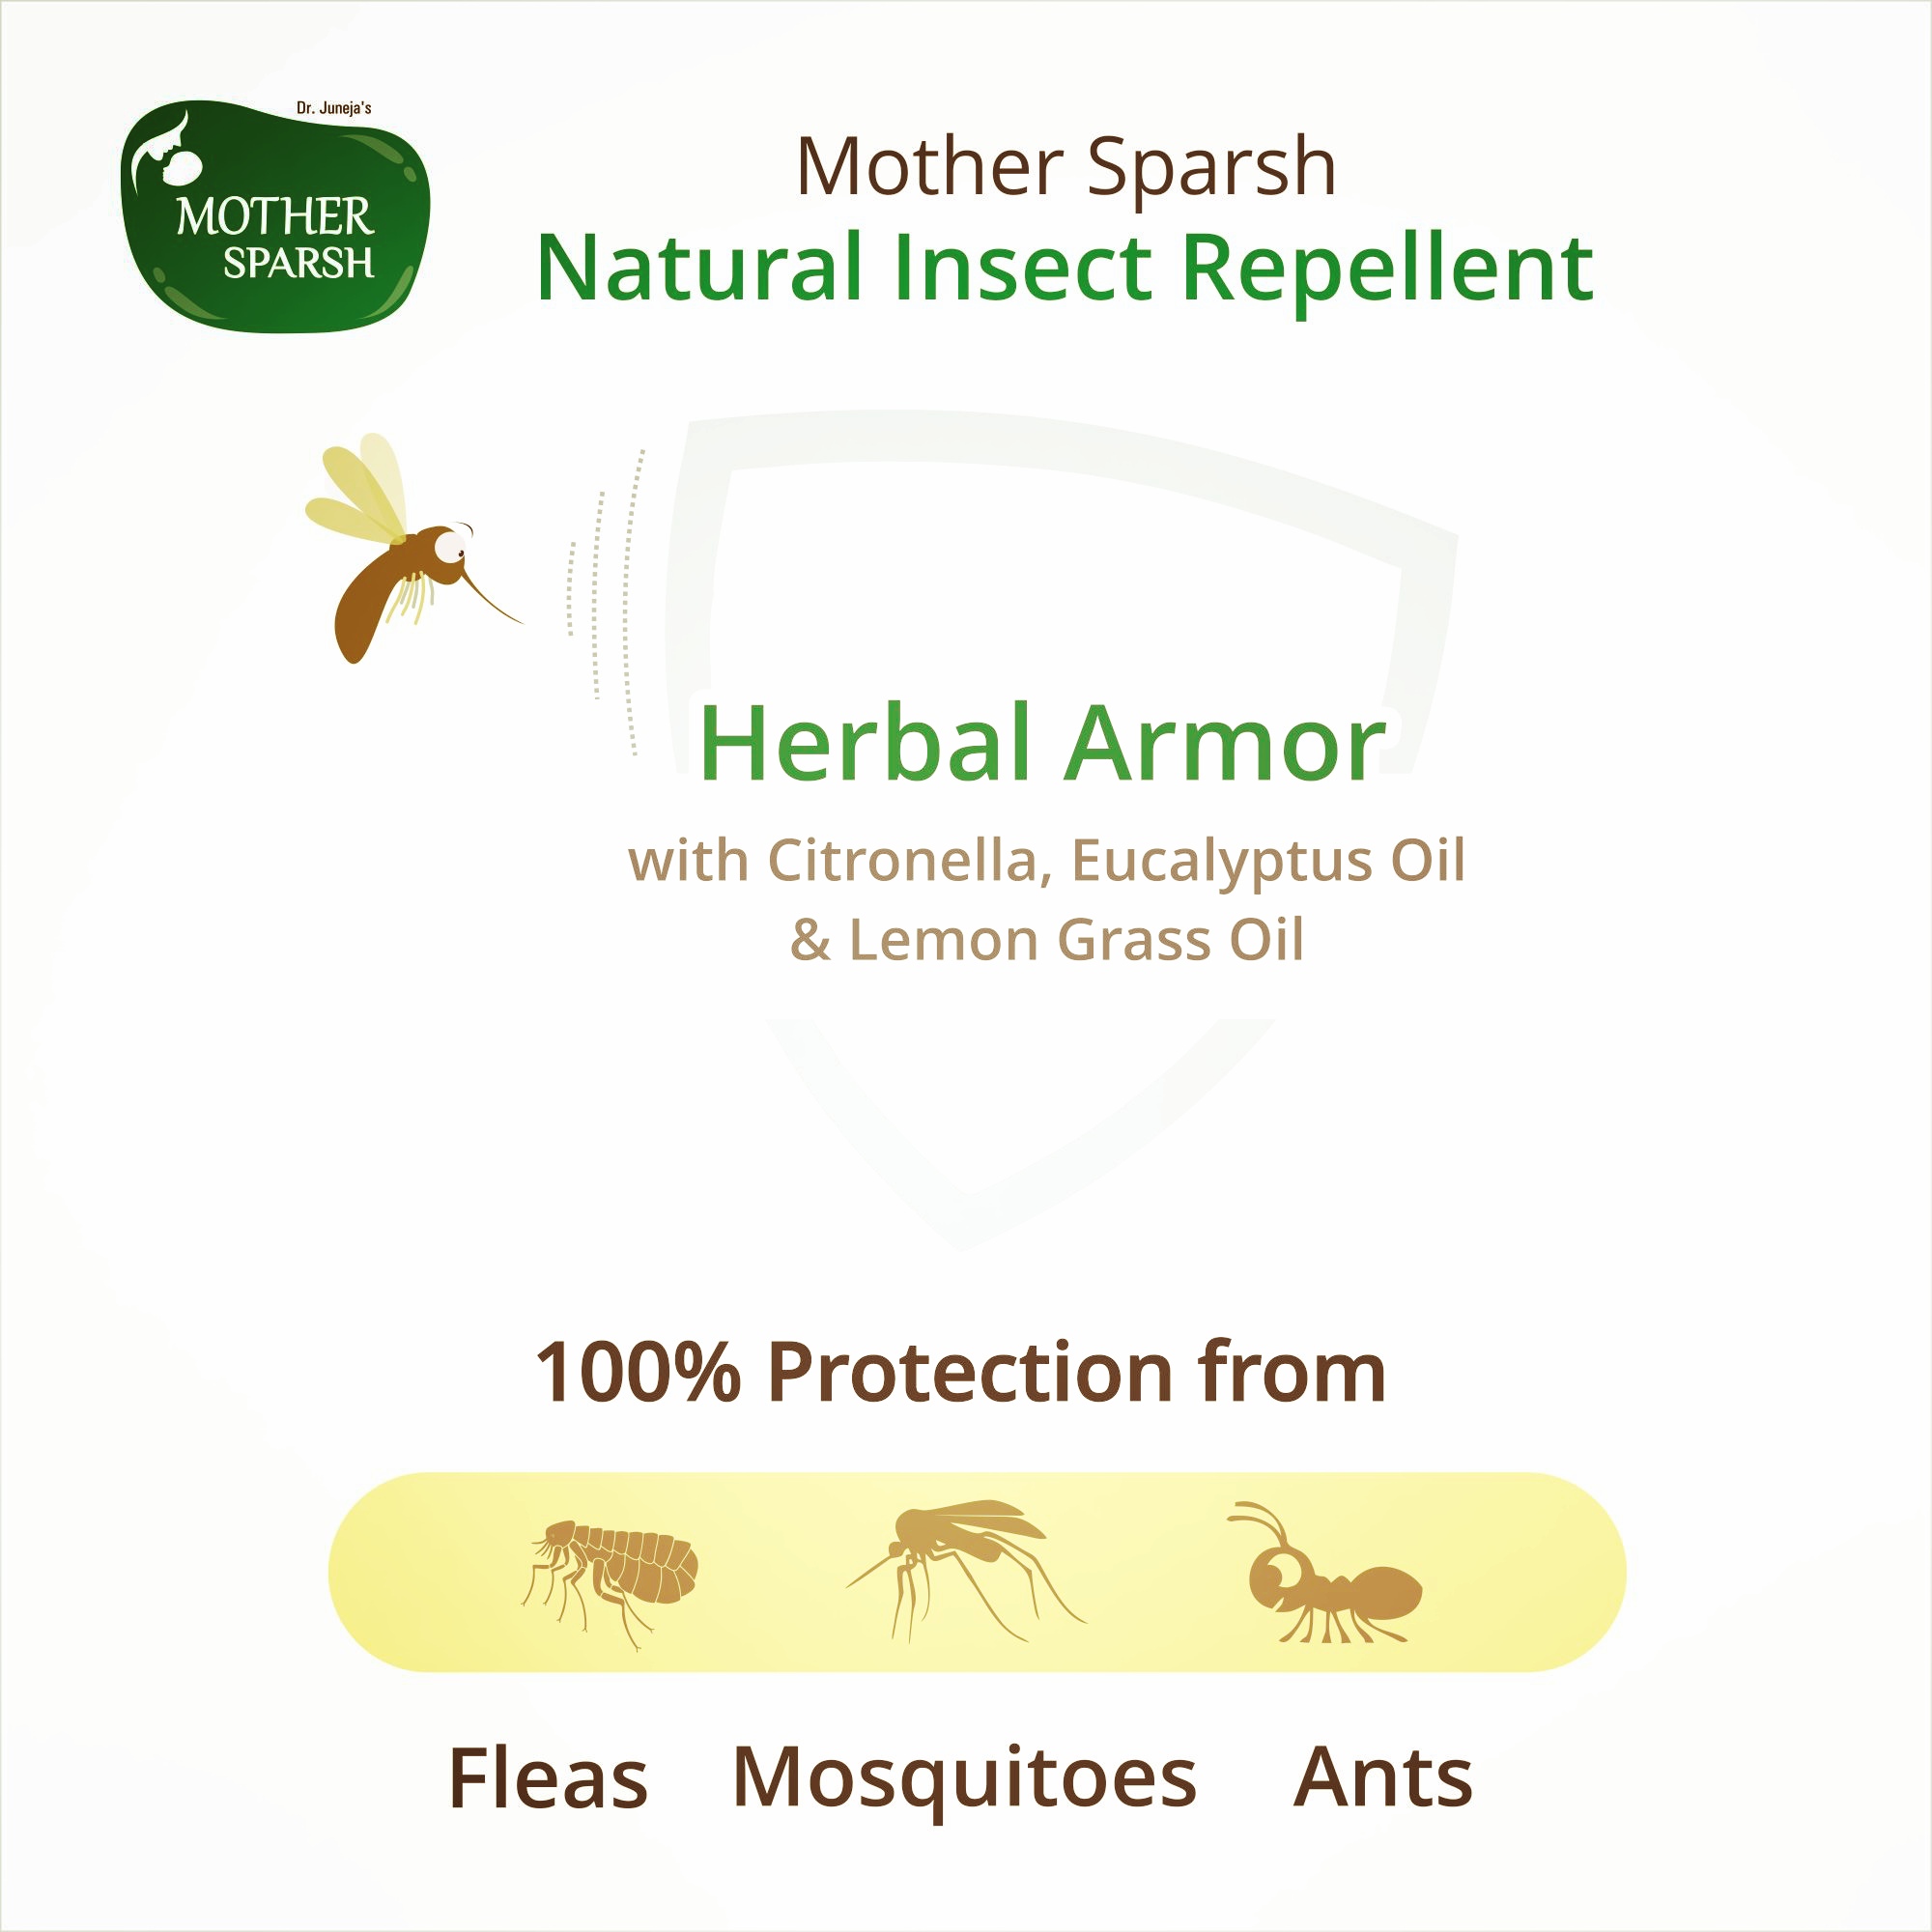 Mother Sparsh insect repellent momislearning